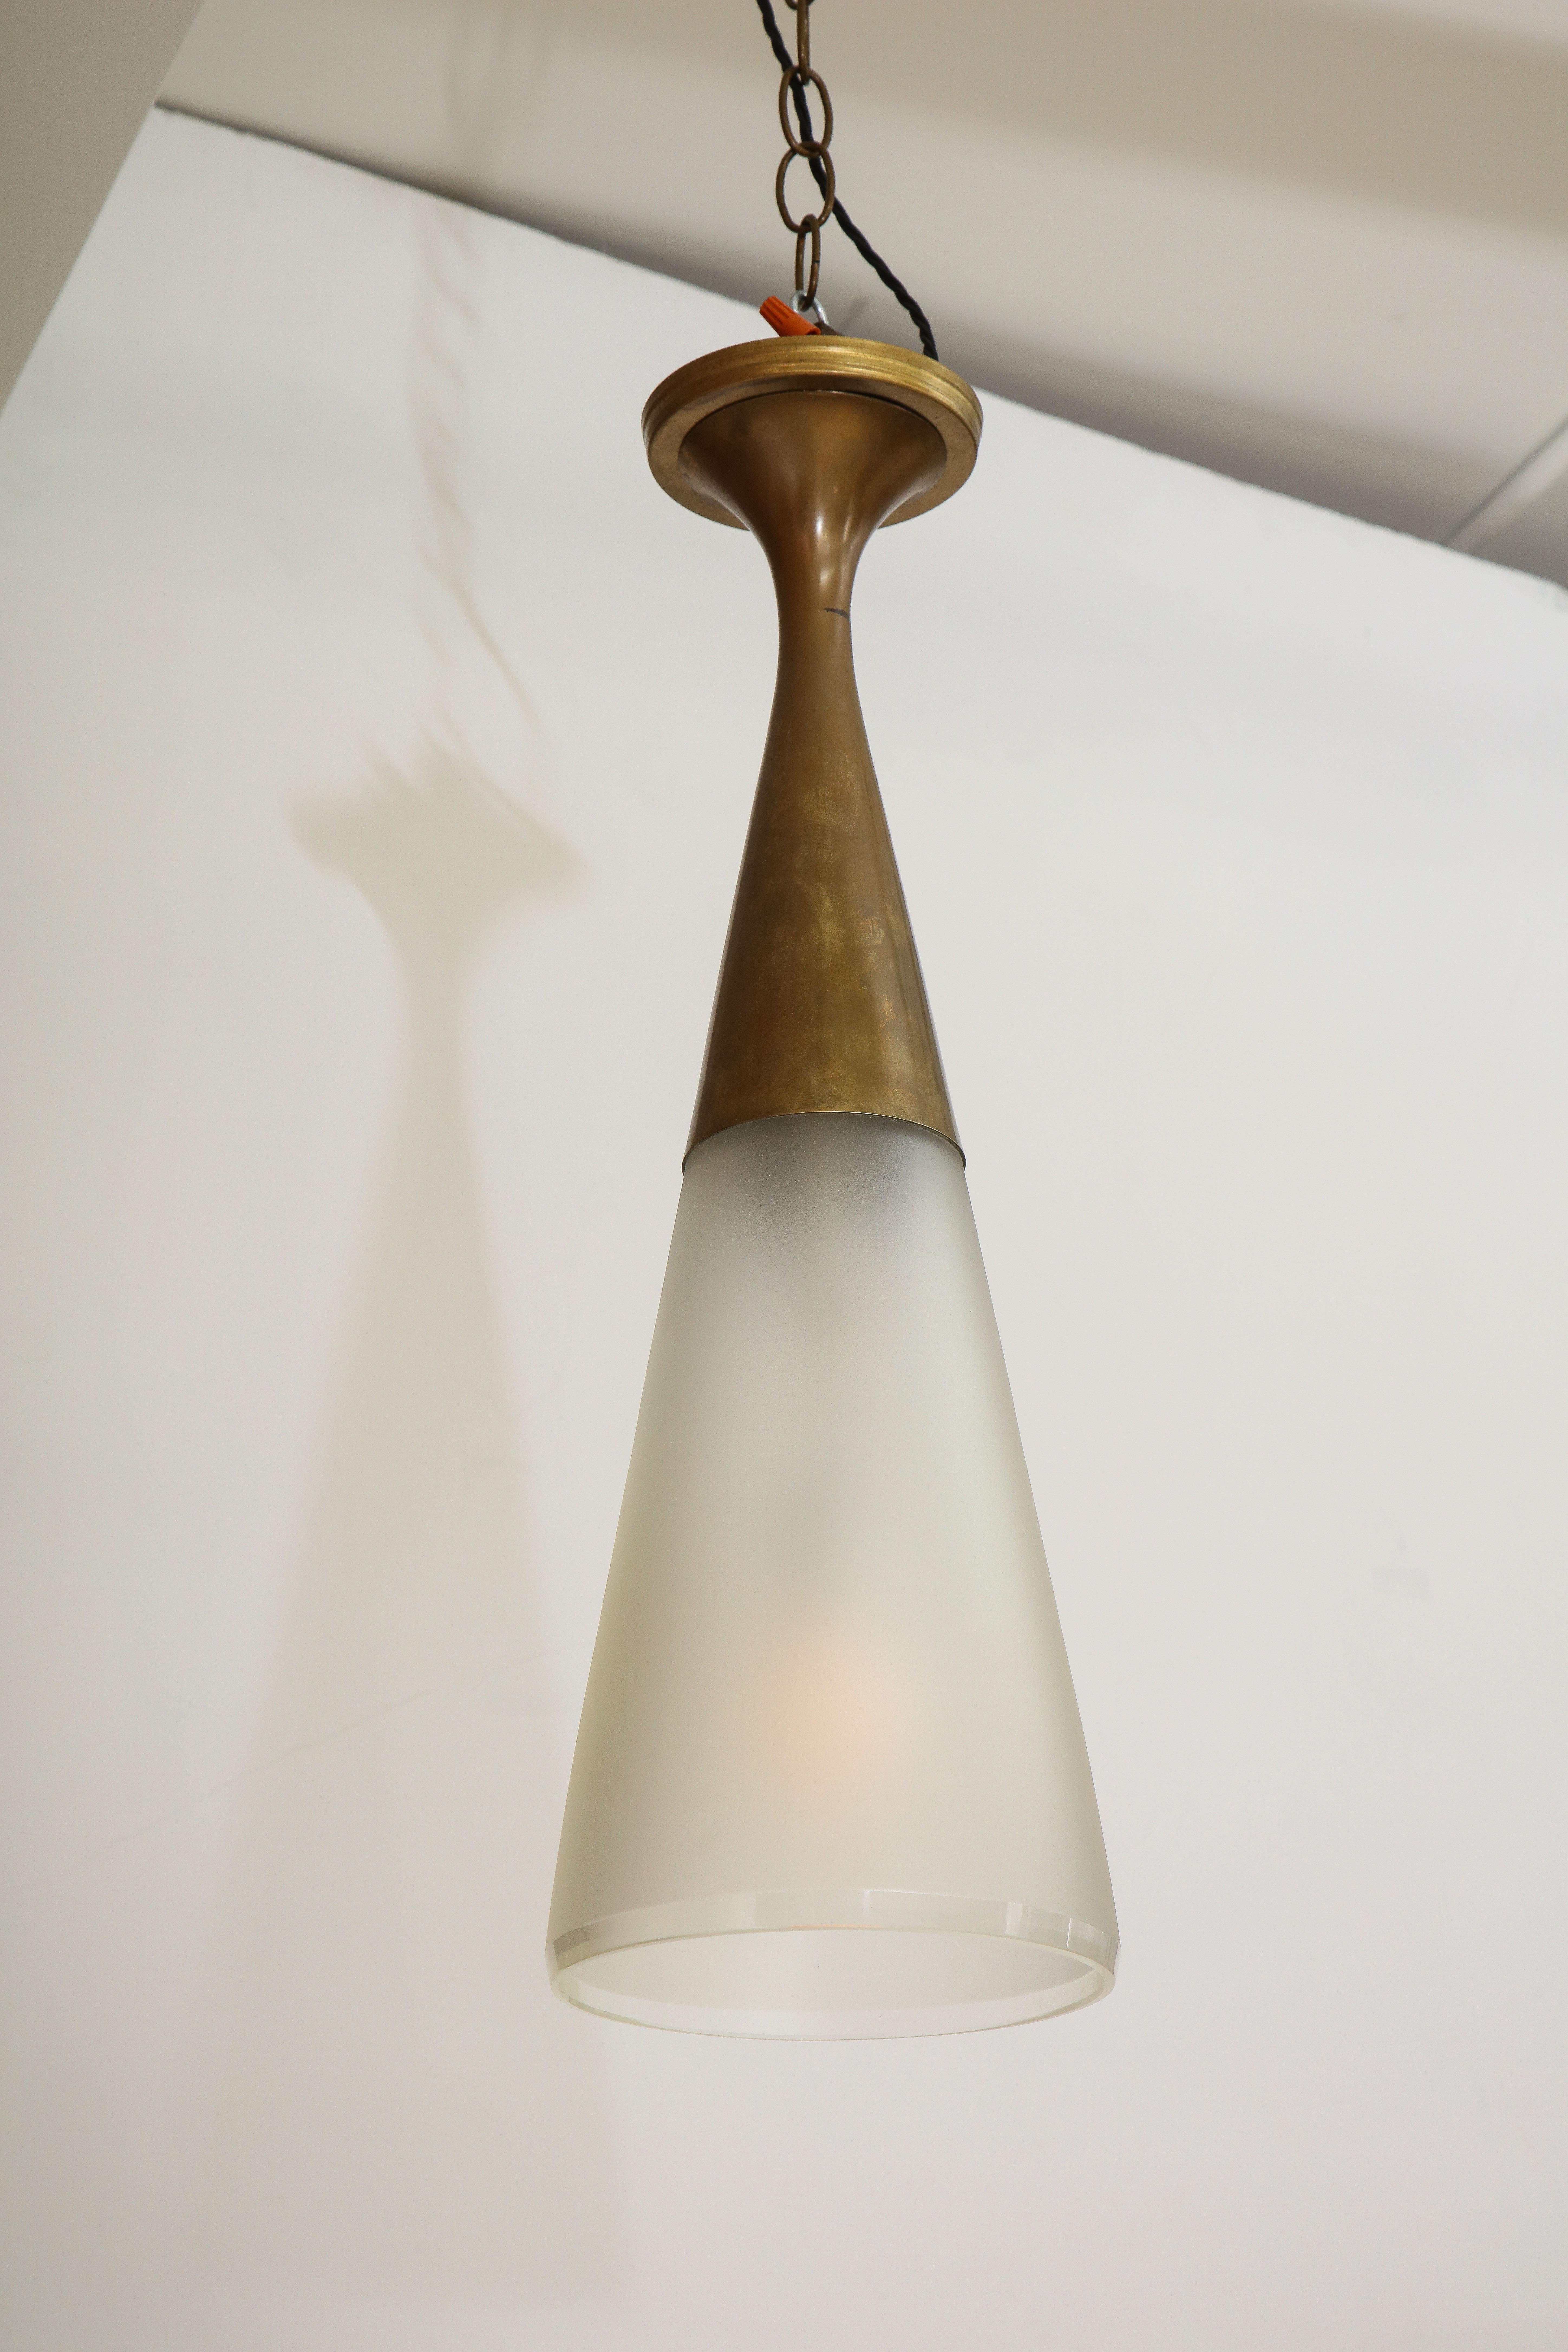 Flushmount ceiling light by Max Ingrand for Fontana Arte. Elegant cone form light of polished brass and satin white glass shade. 1 standard size Edison socket. Recently made ceiling plate for mounting to J-box. Published: Fontana Arte: Una Storia